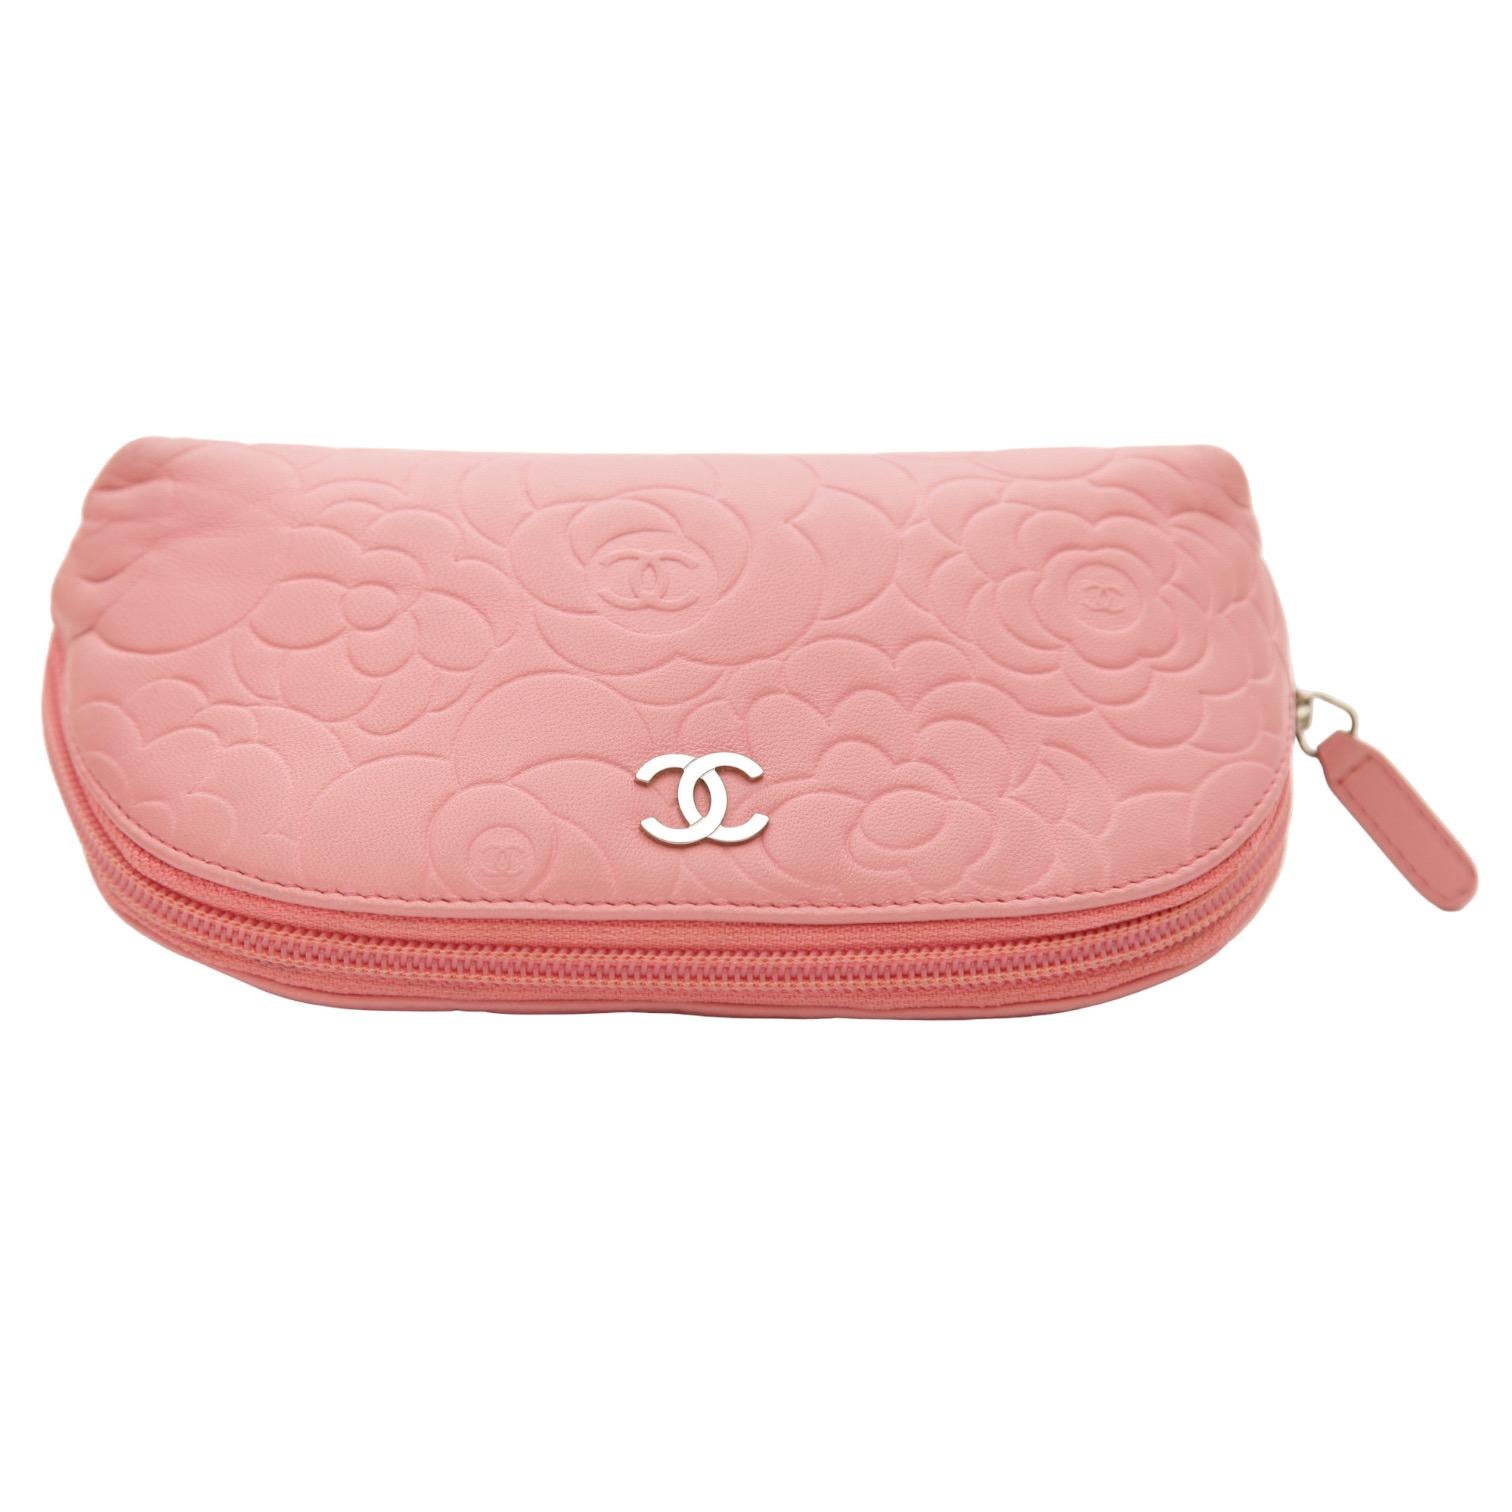 CHANEL Pink Lambskin Leather Camellia Cosmetic Pouch Case Bag Silver CC Zipper In Good Condition In Hollywood, FL